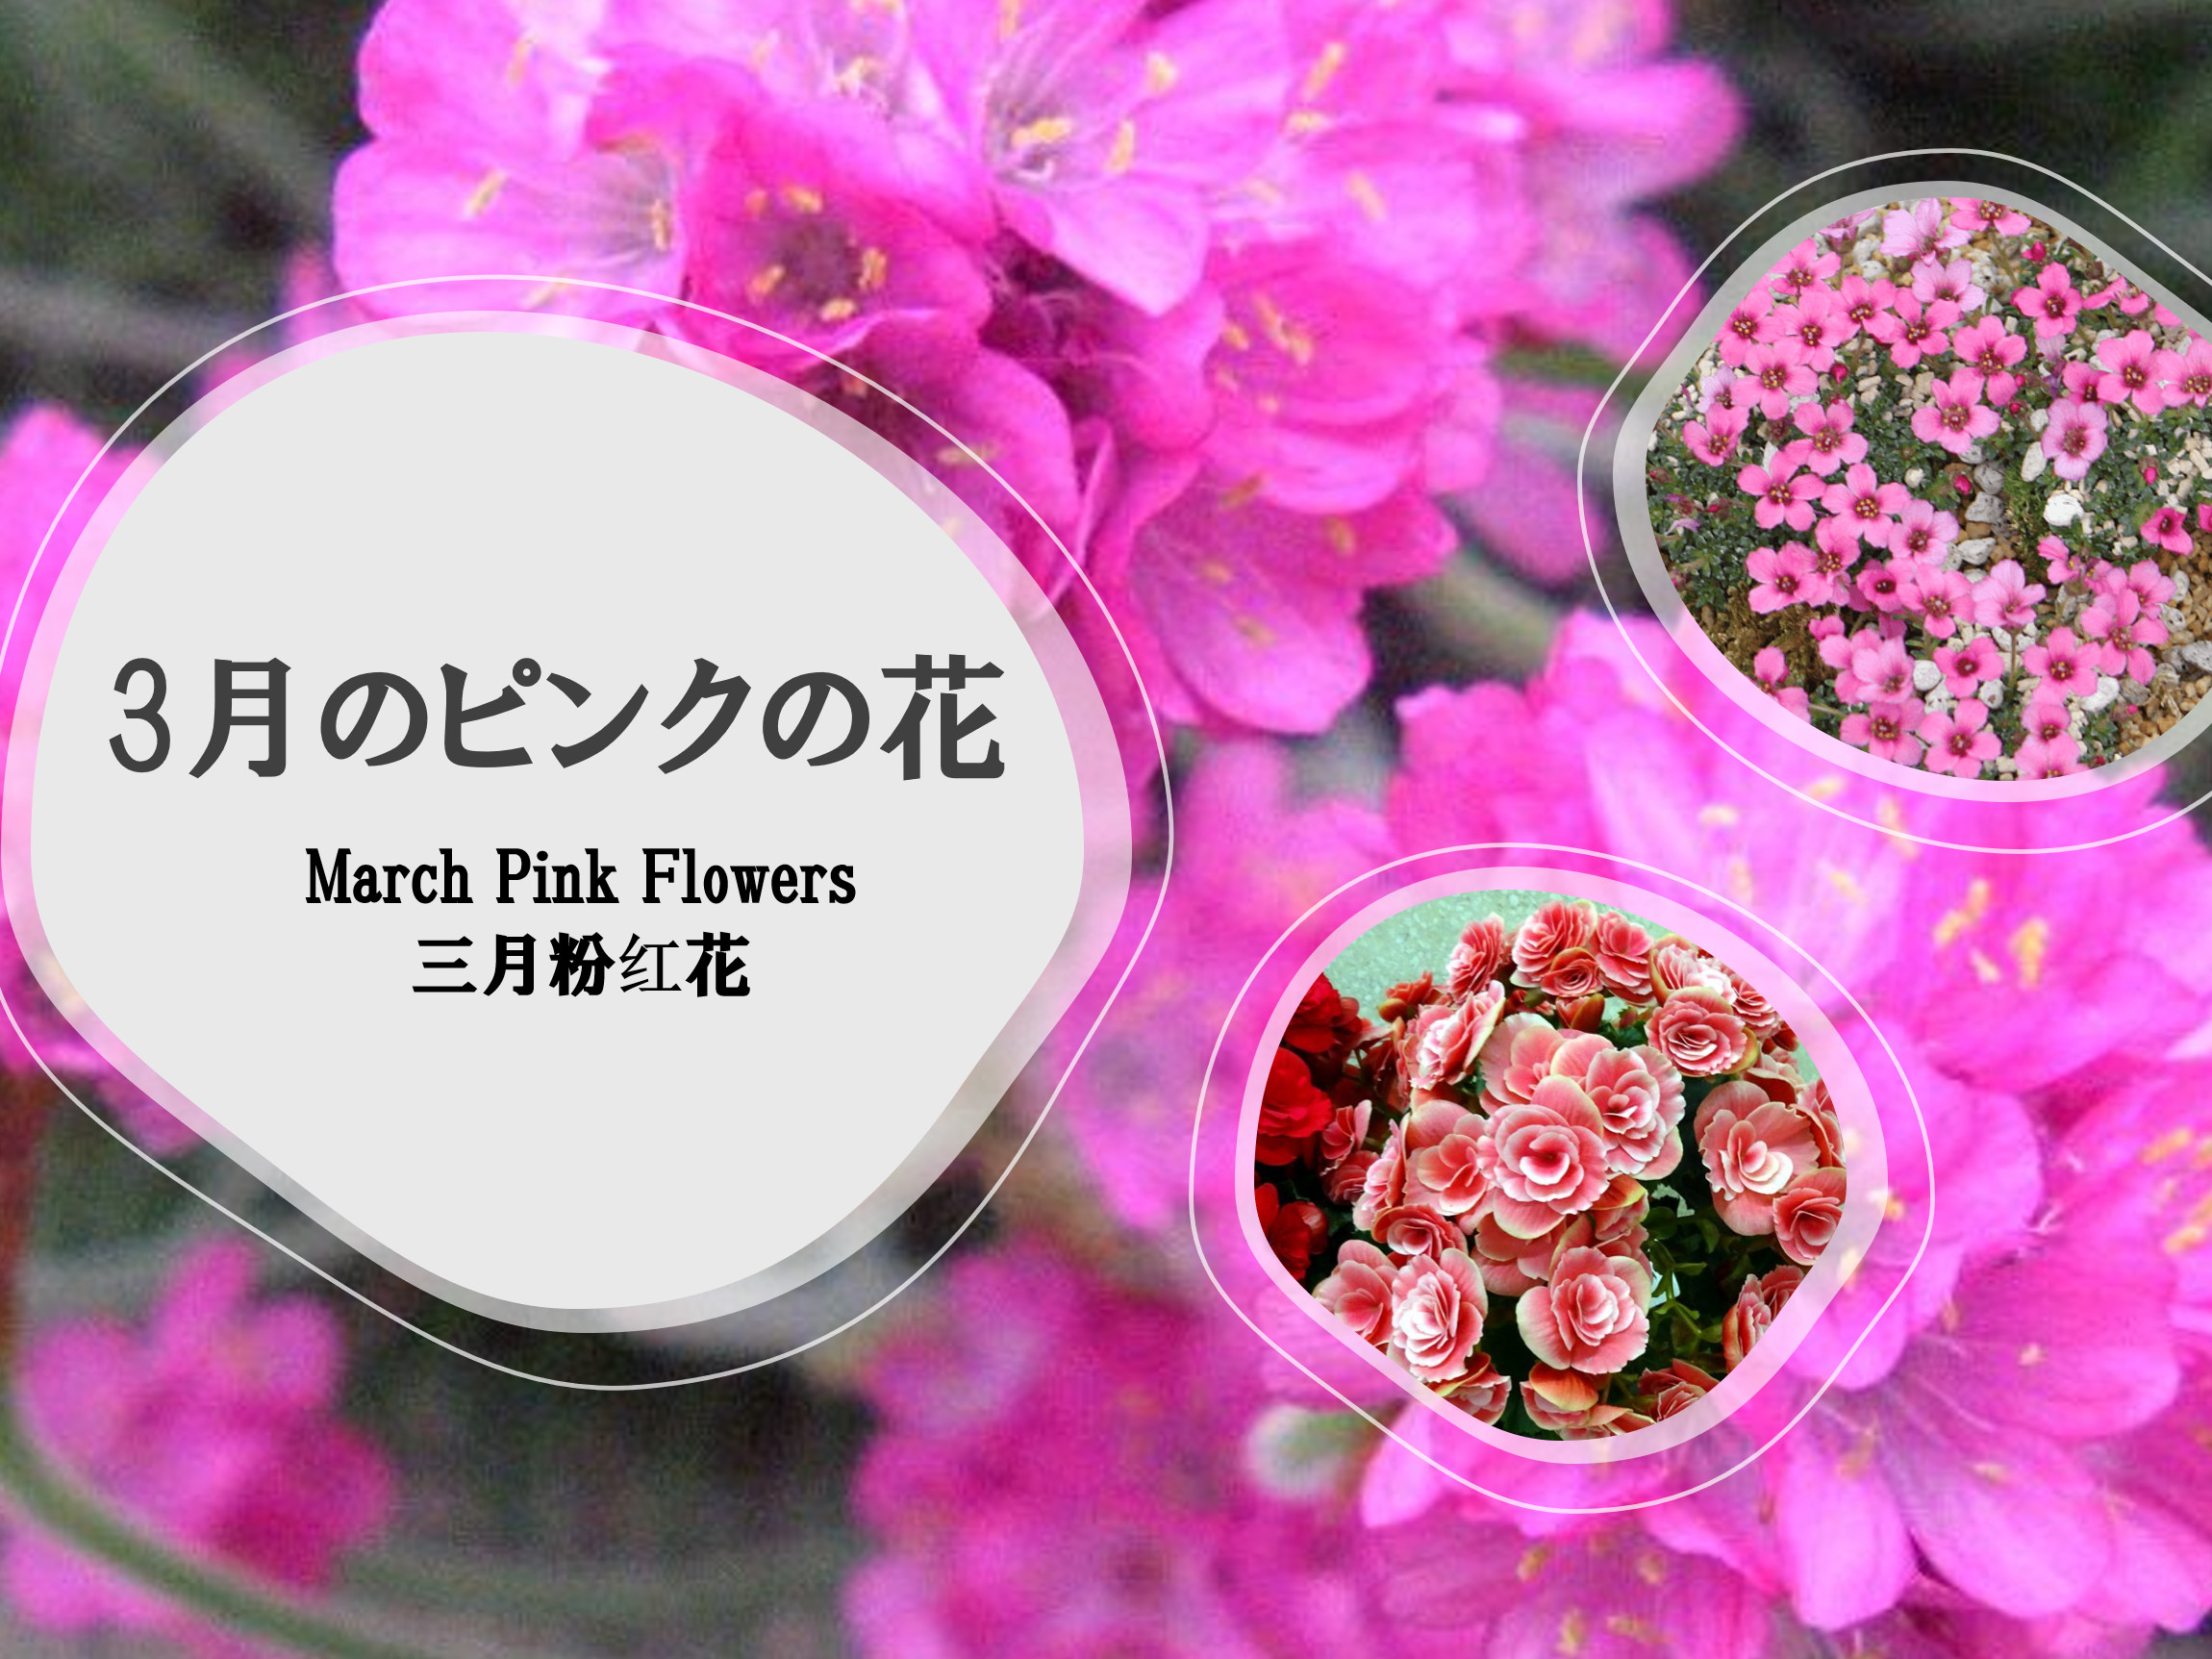 Flowers that bloom in March